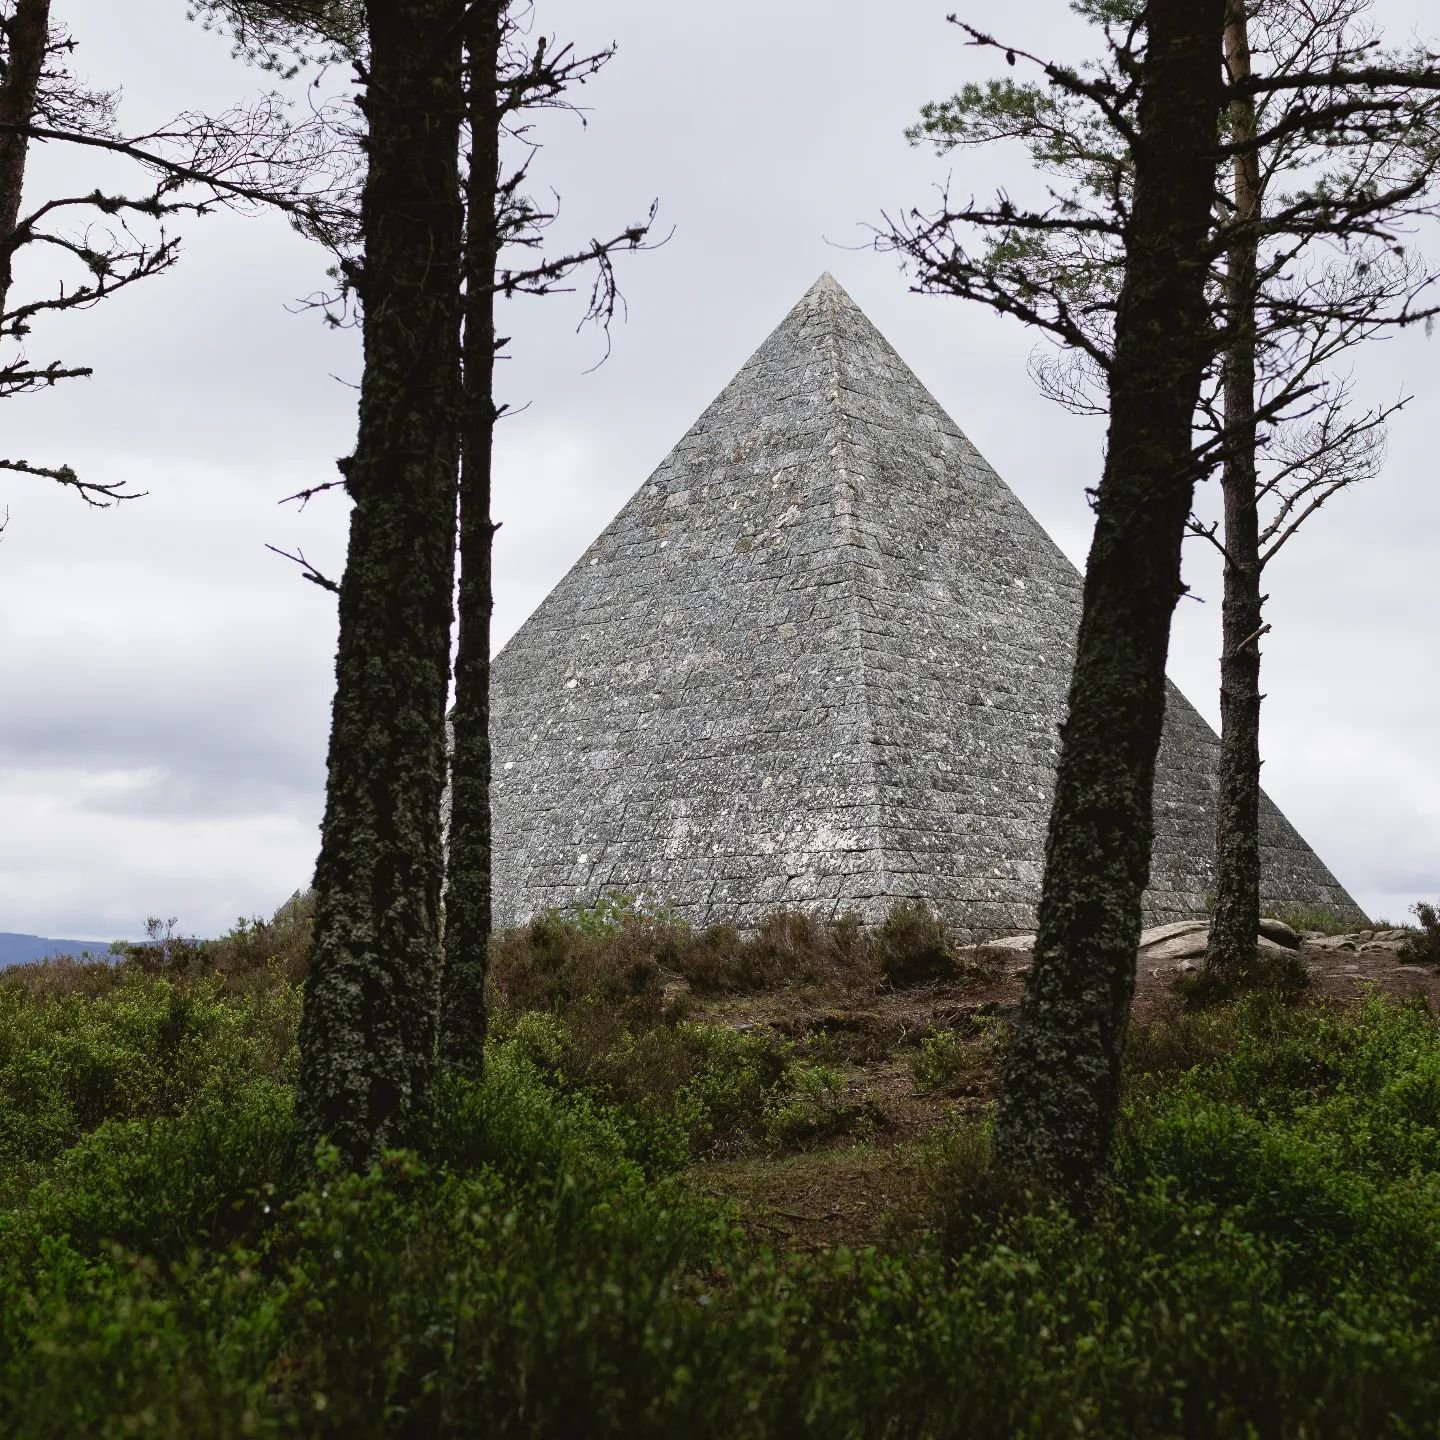 This weekend we took the kids to the Balmoral estate and climbed up to Prince Albert&rsquo;s Cairn - the biggest and most well known of 11 Cairns throughout the estate. It was commissioned by Queen Victoria shortly after Prince Albert&rsquo;s untimel